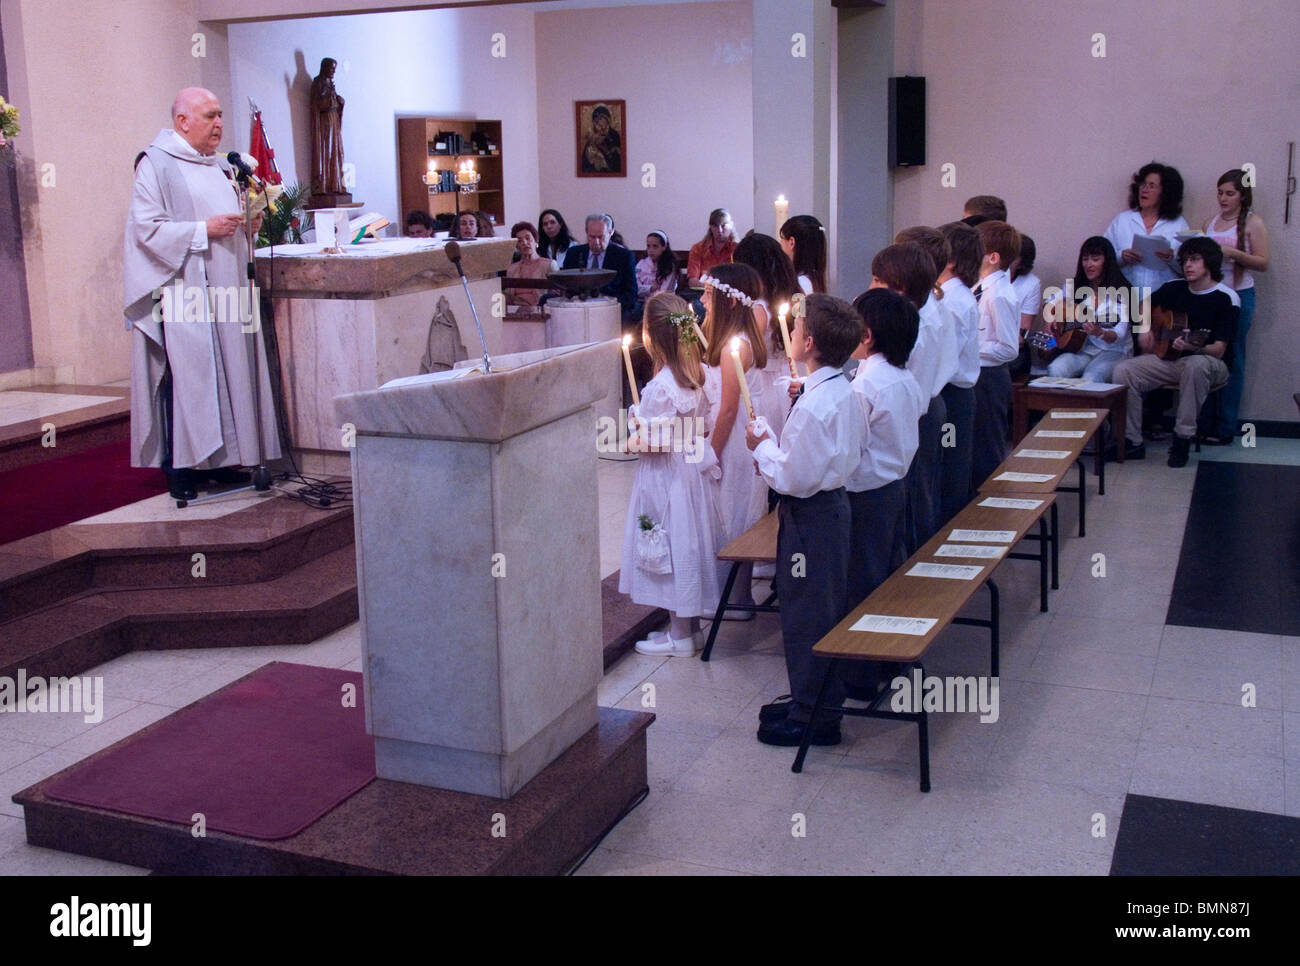 priest giving speech and children standing and holding candlelight Stock Photo